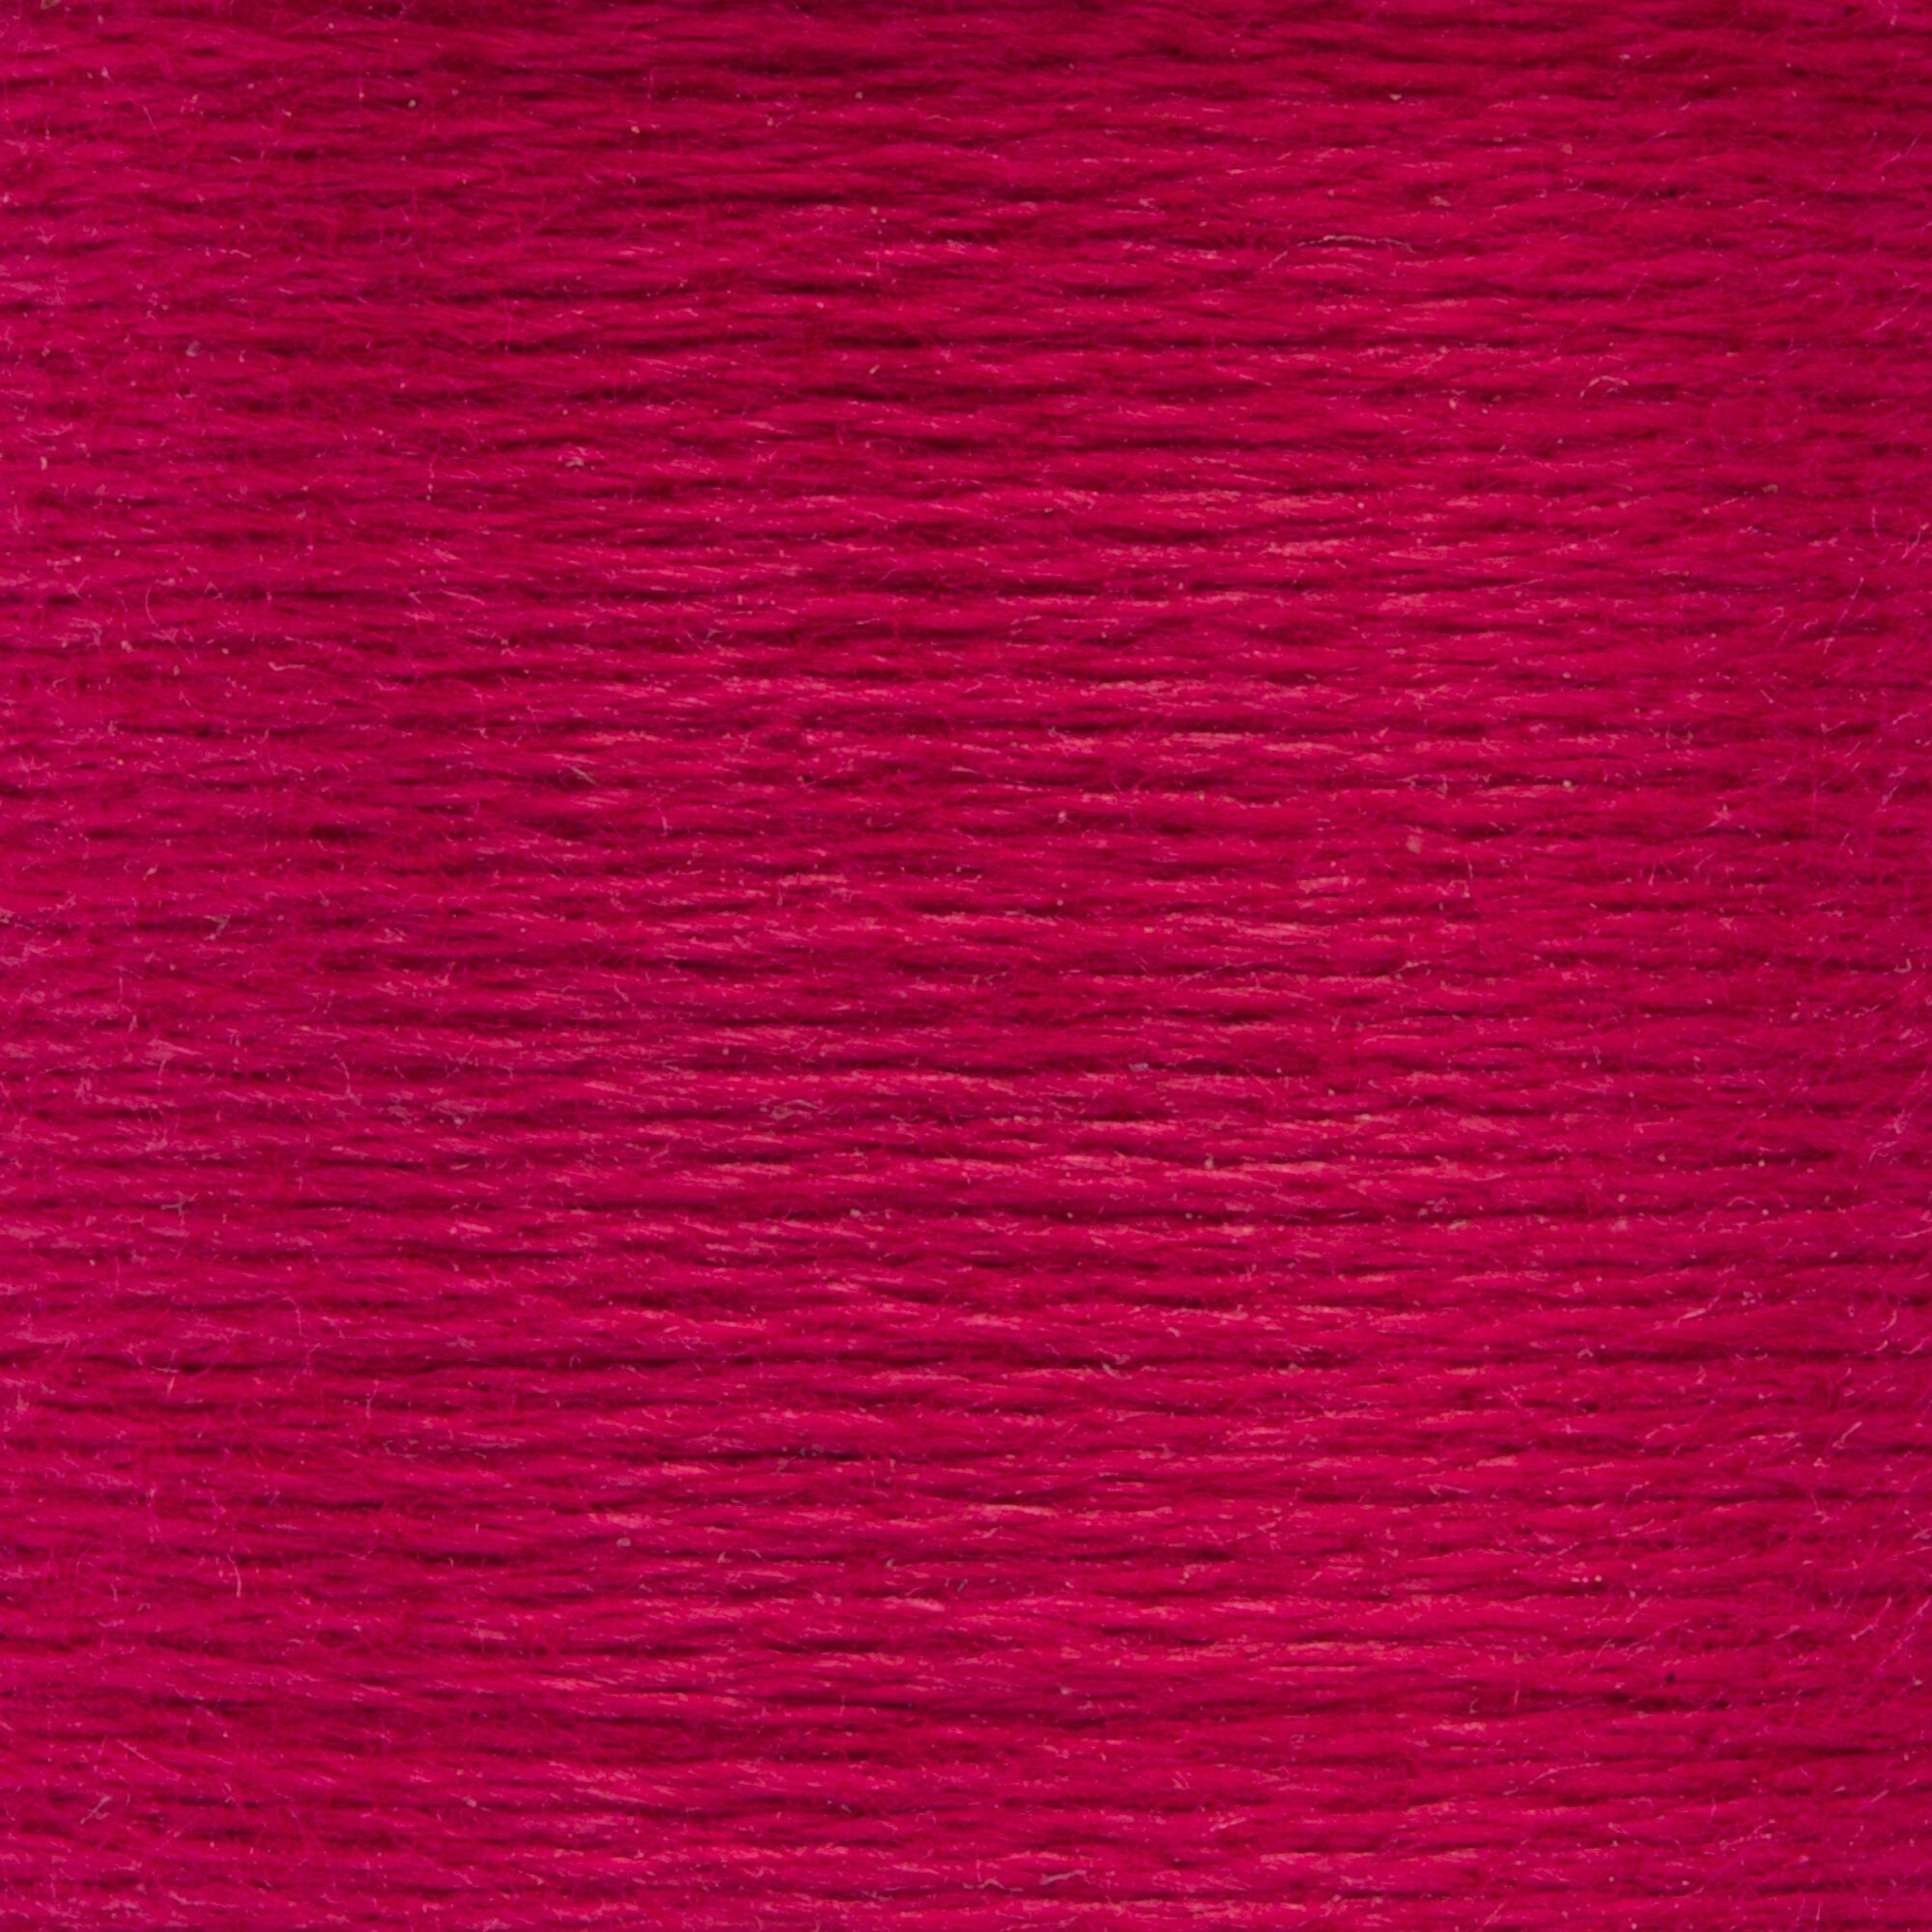 Anchor Embroidery Floss in China Rose